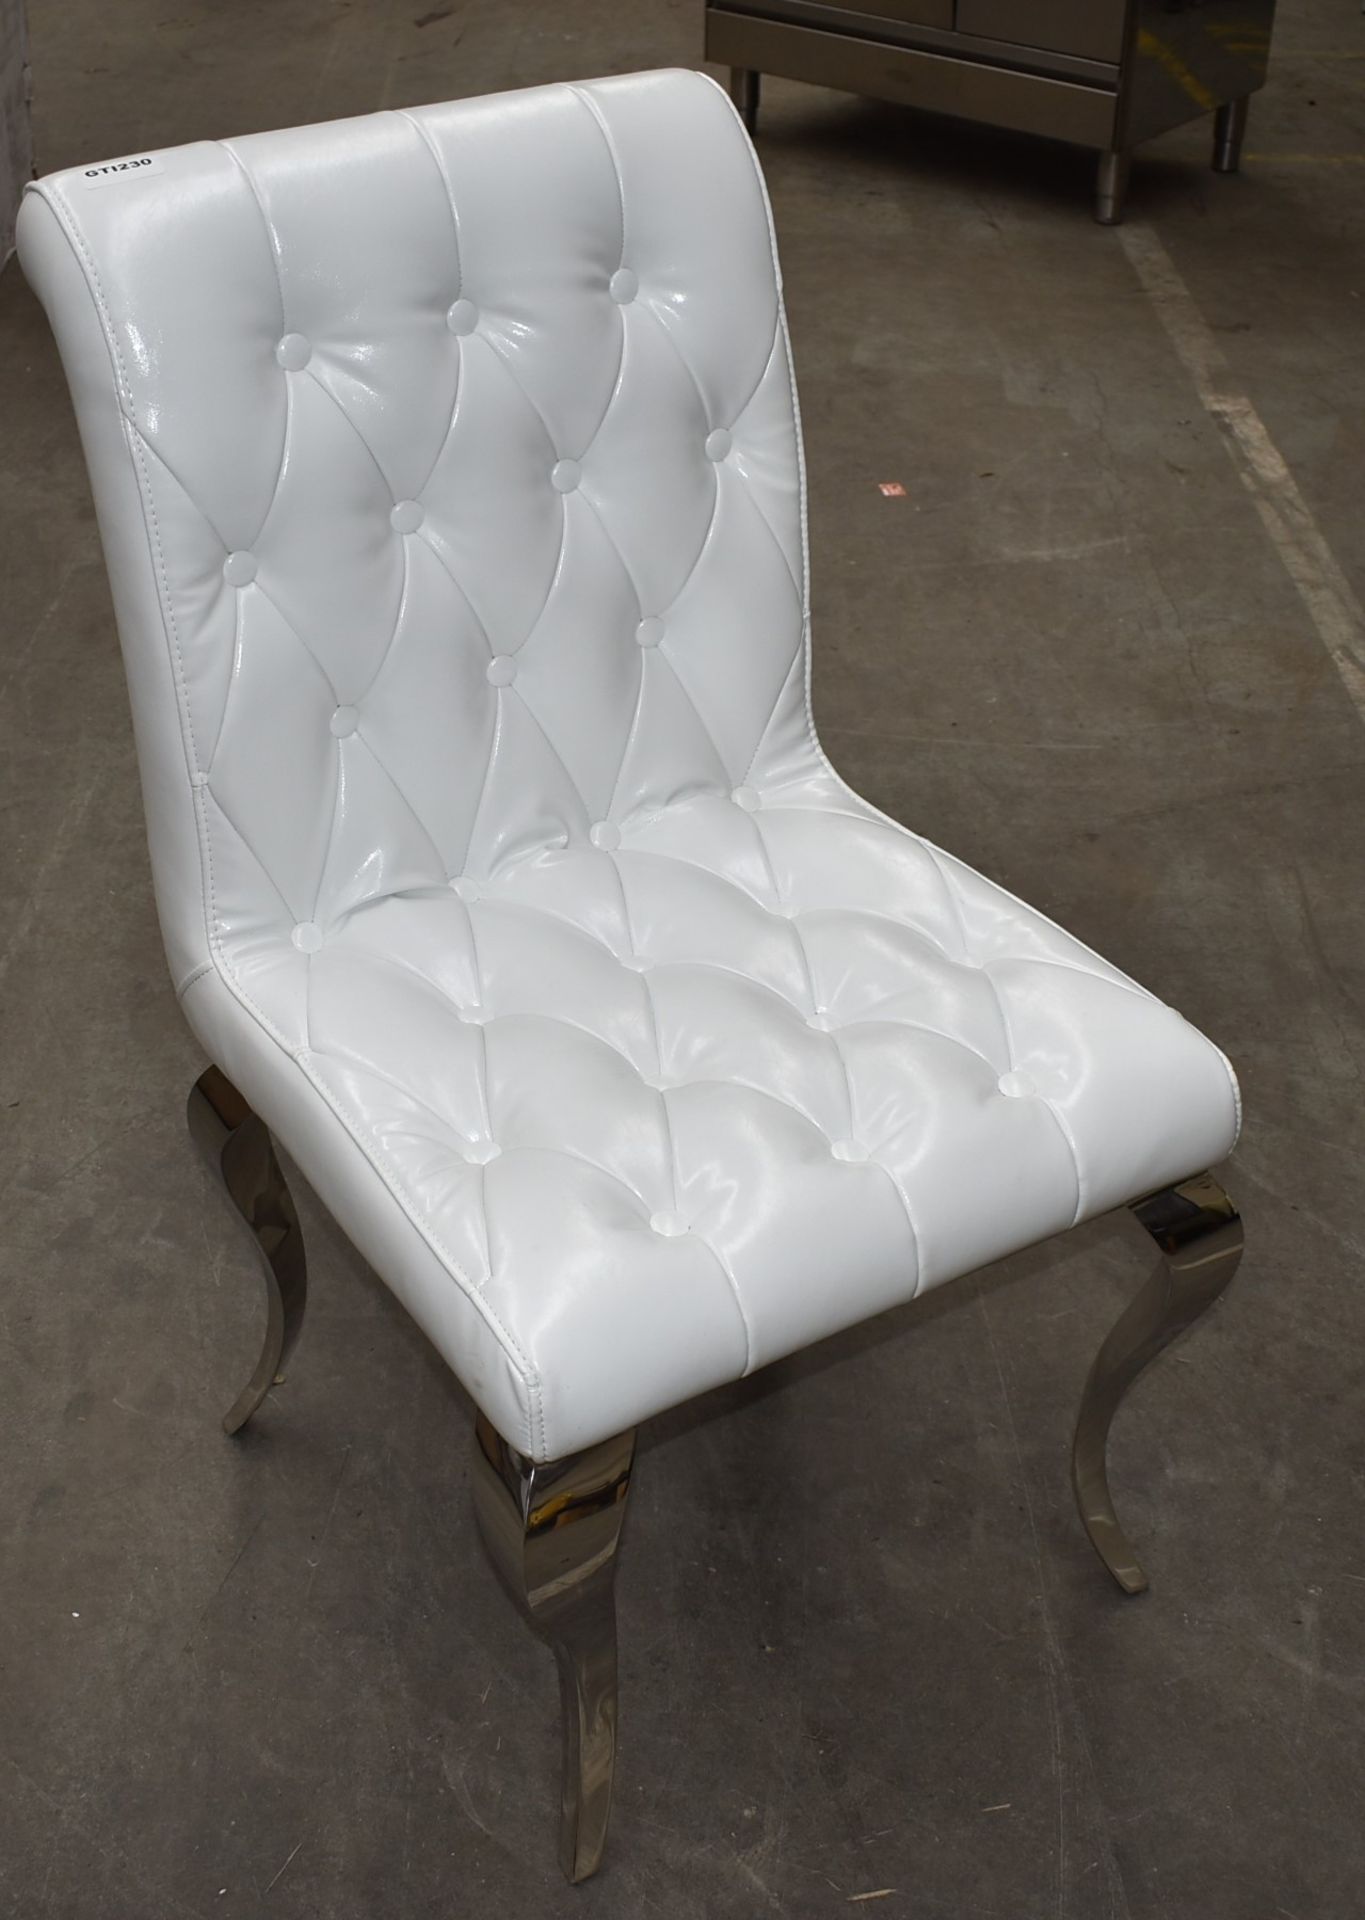 1 x Elegant White Leather Studded Bedroom Chair With Scroll Back and Chrome Legs - CL999 - Ref